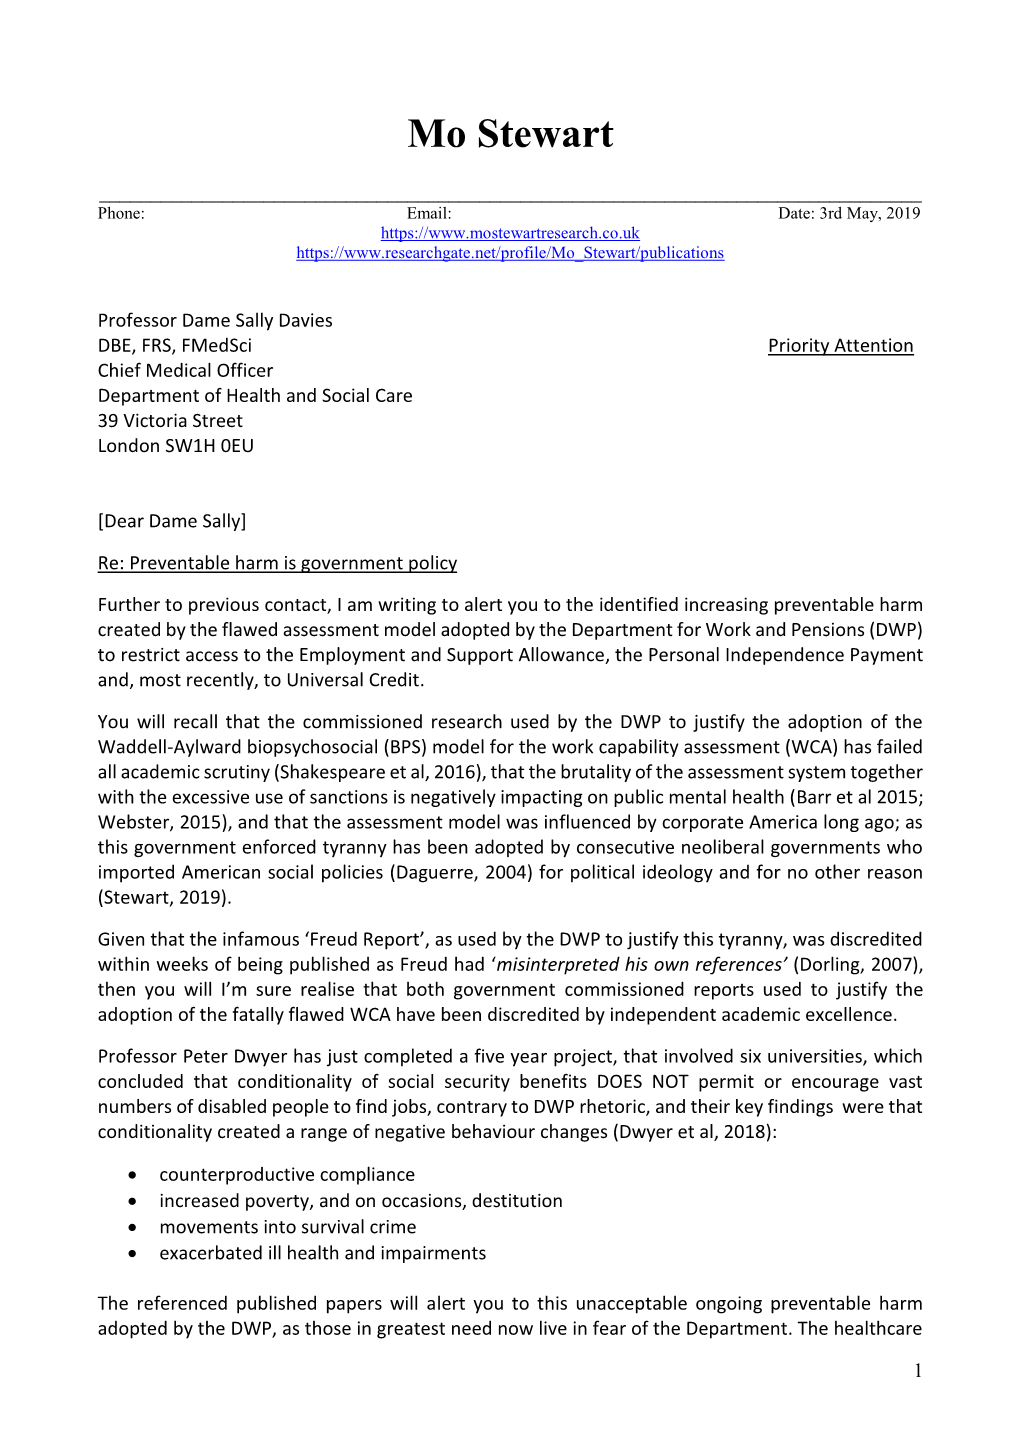 Letter to Professor Dame Sally Davies Chief Medical Officer Dpt of Health and Social Care